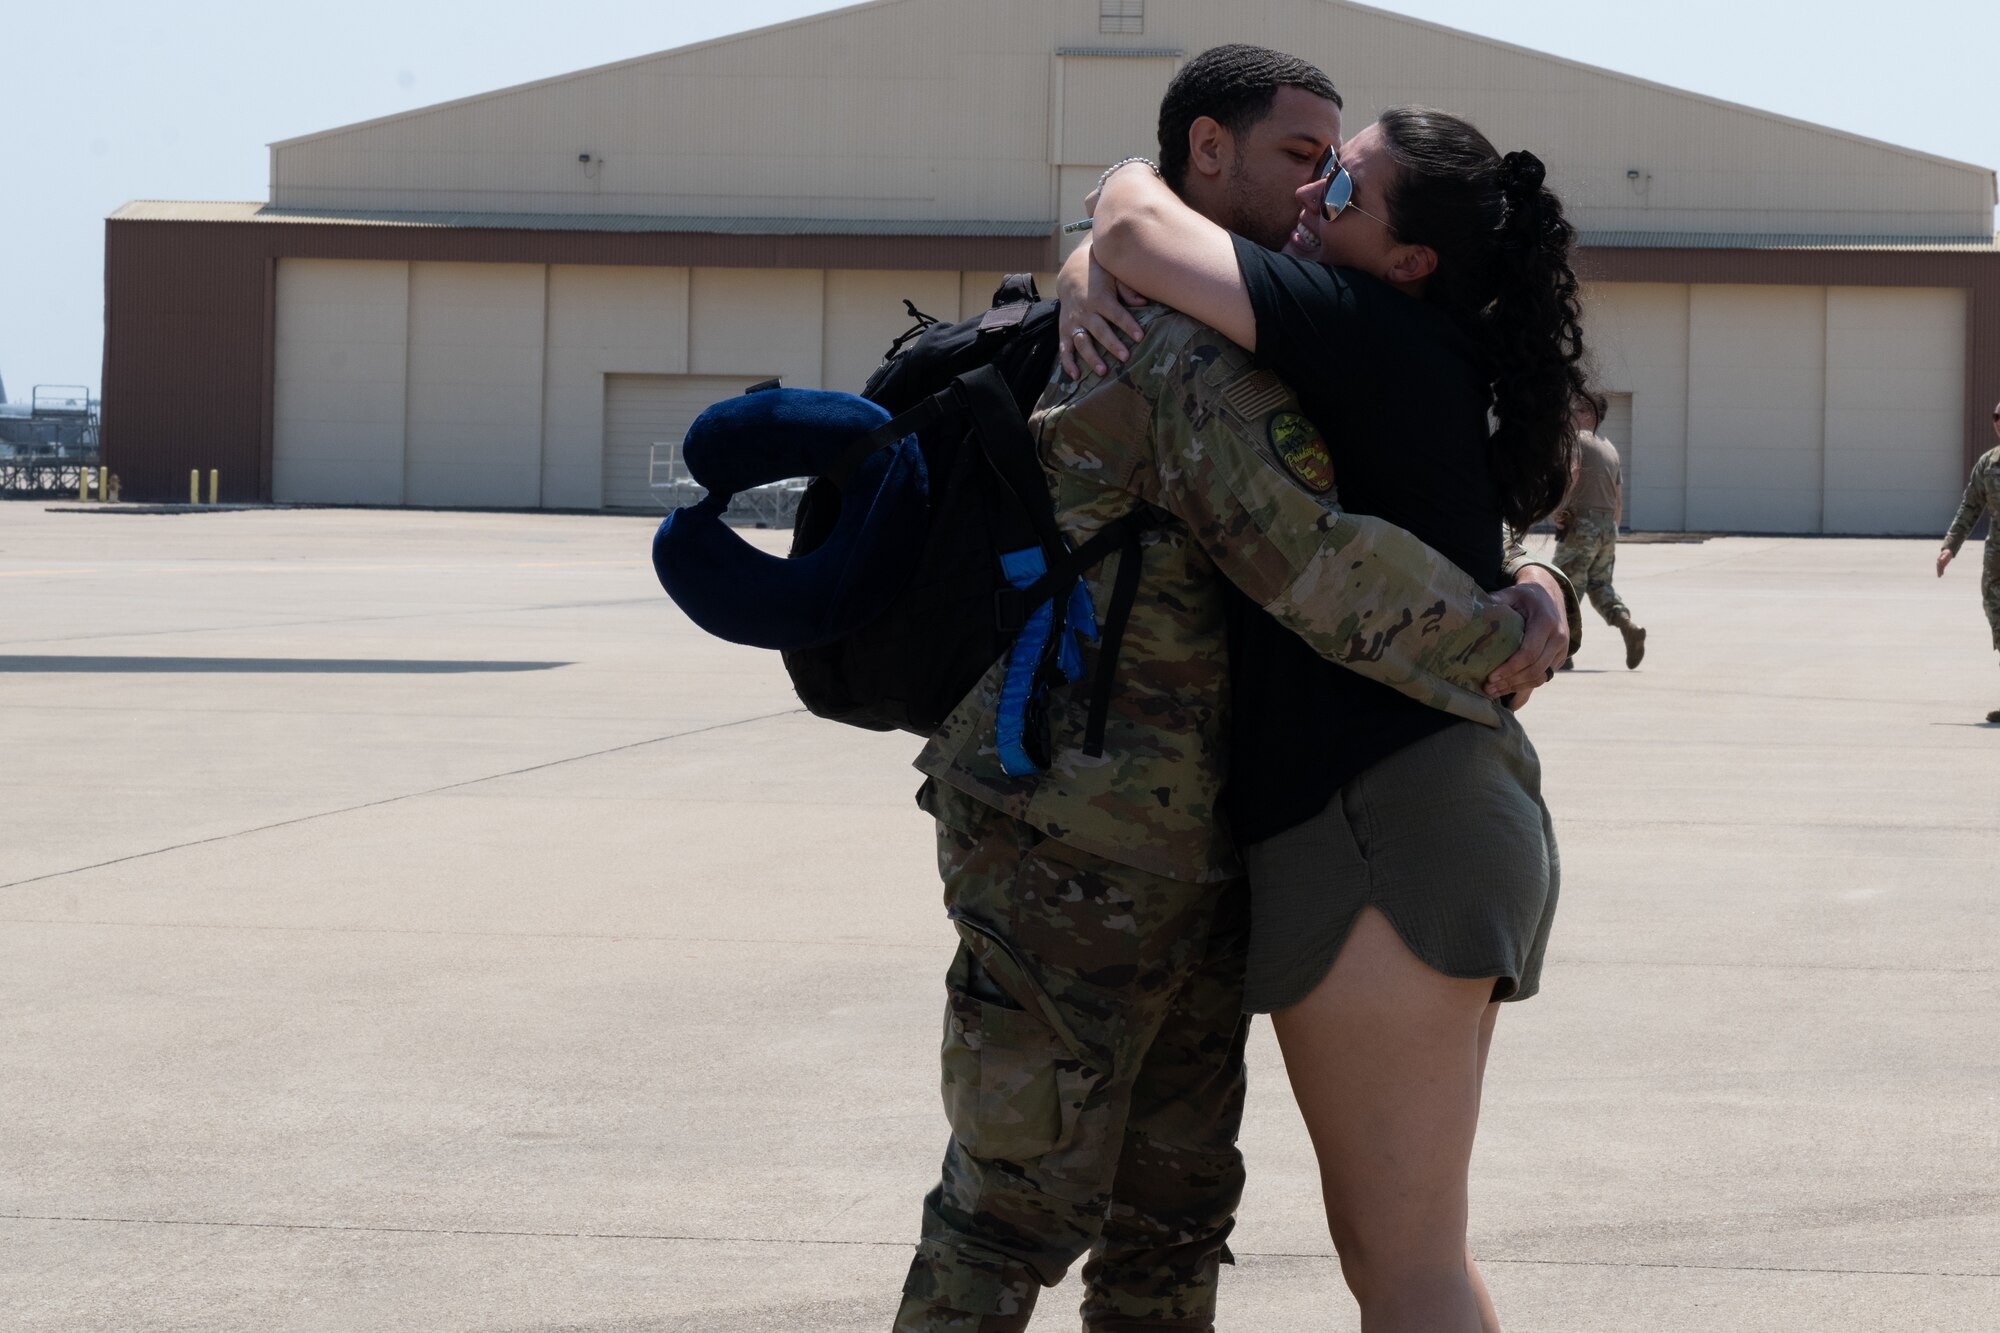 An Airman from the 2nd Bomb Wing reunites with family after deployment to Andersen Air Force Base, Guam at Barksdale Air Force Base, La.